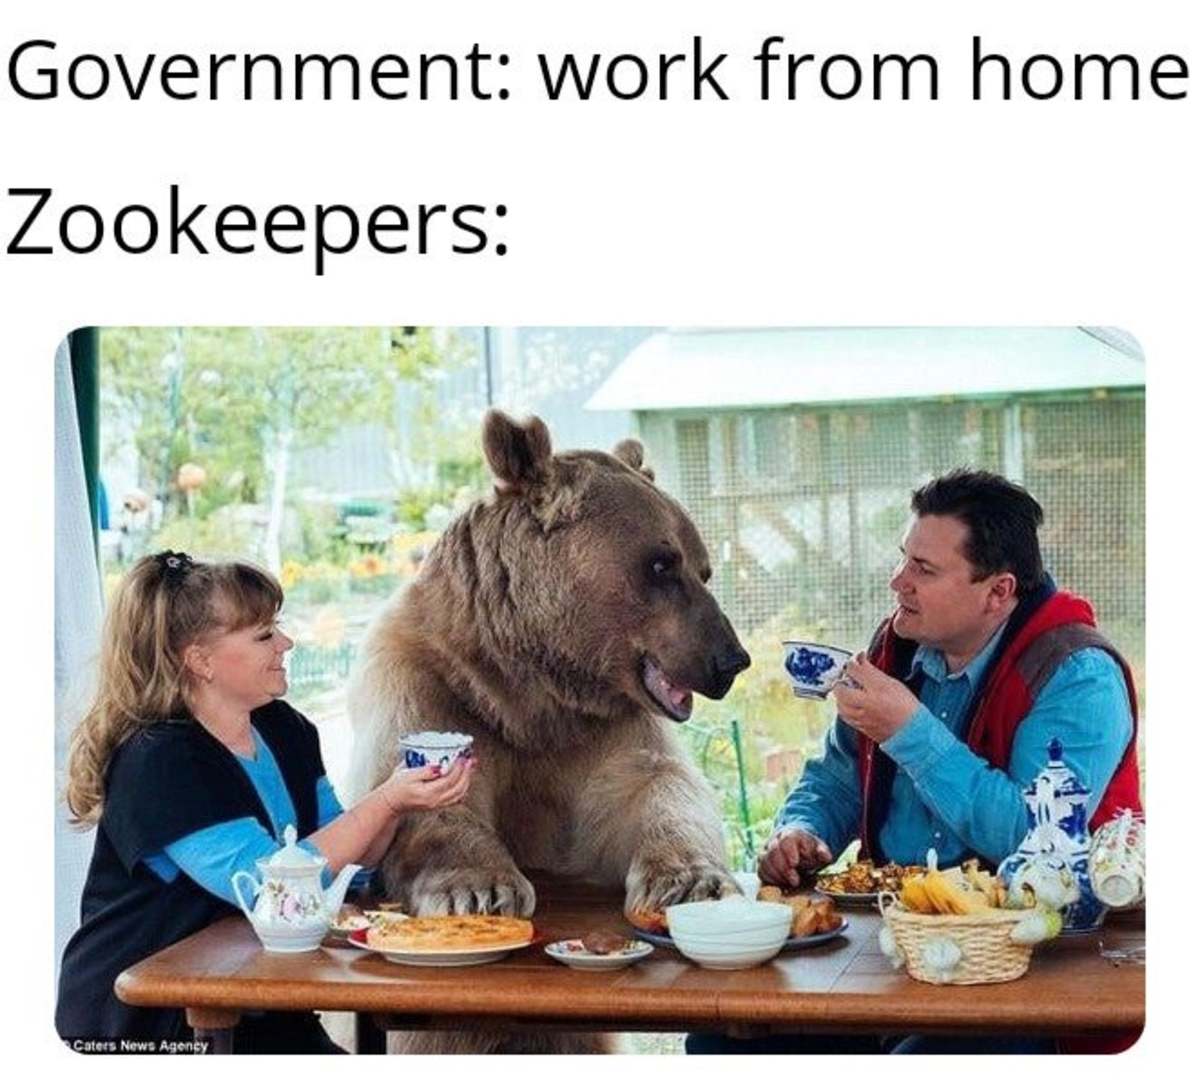 Zookeepers Working from Home